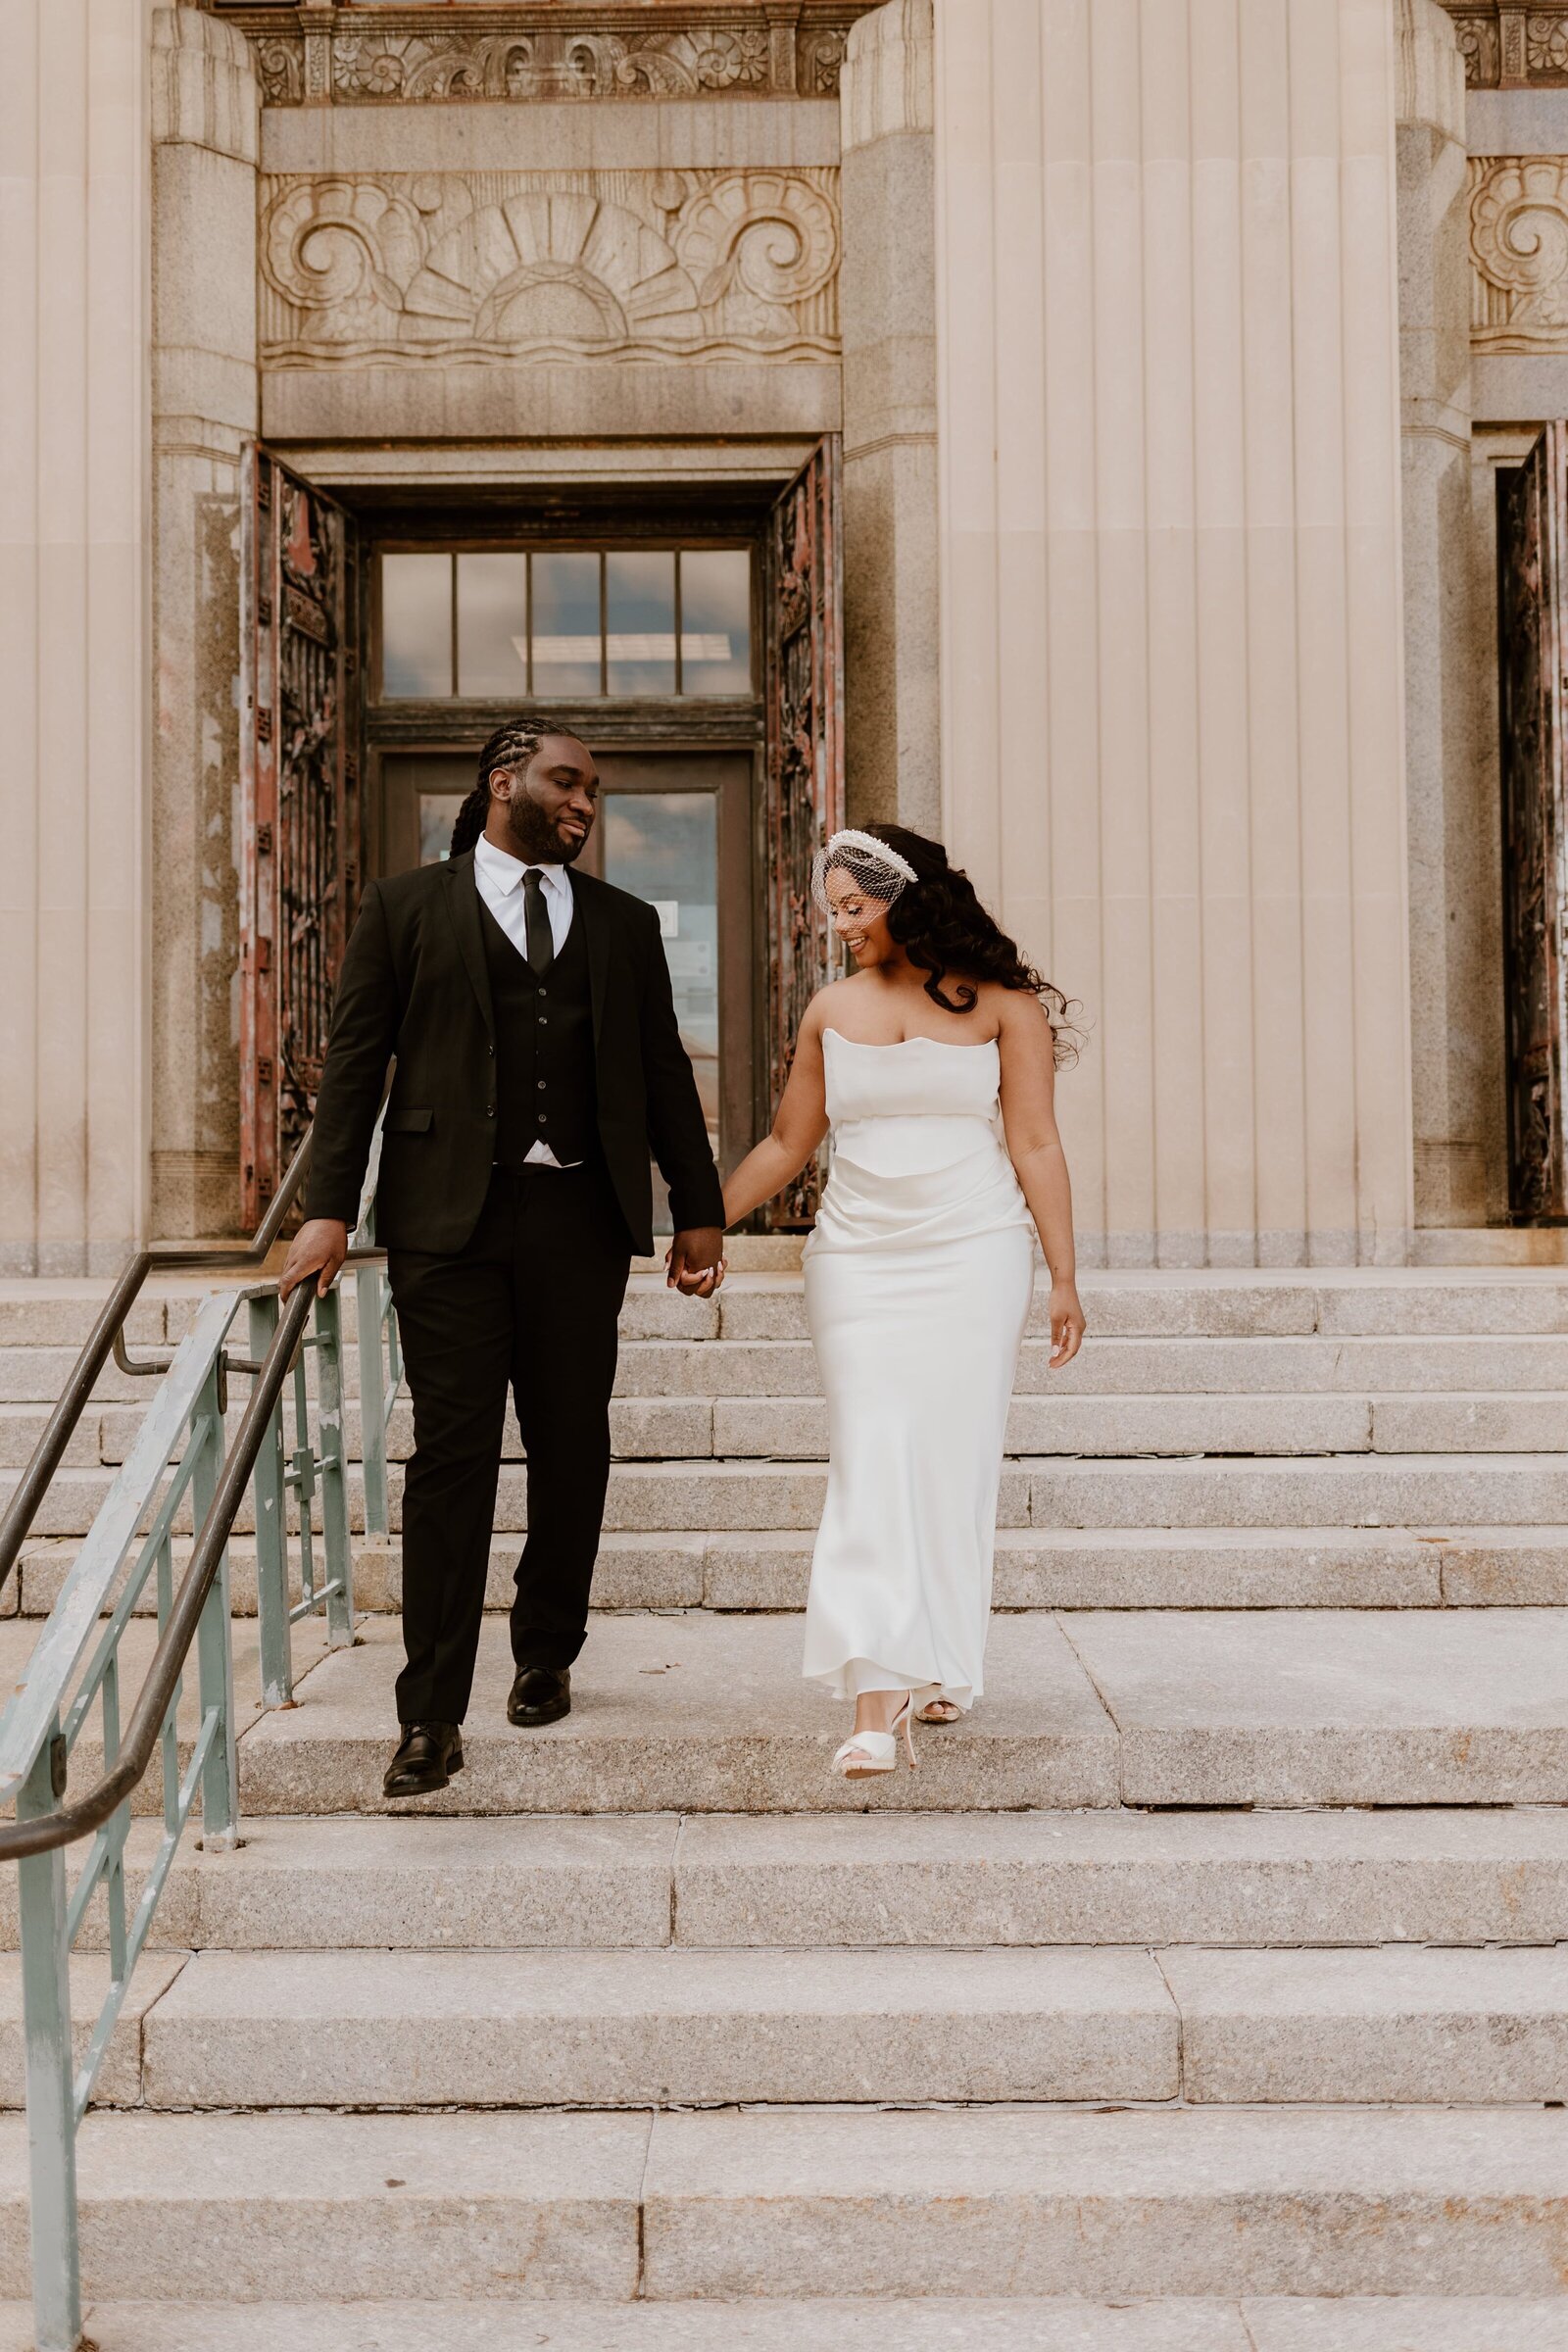 A couple walks hand in hand down the steps of a courthouse, captured by a Hudson Valley wedding photographer, exemplifying the grace and joy of their special day.